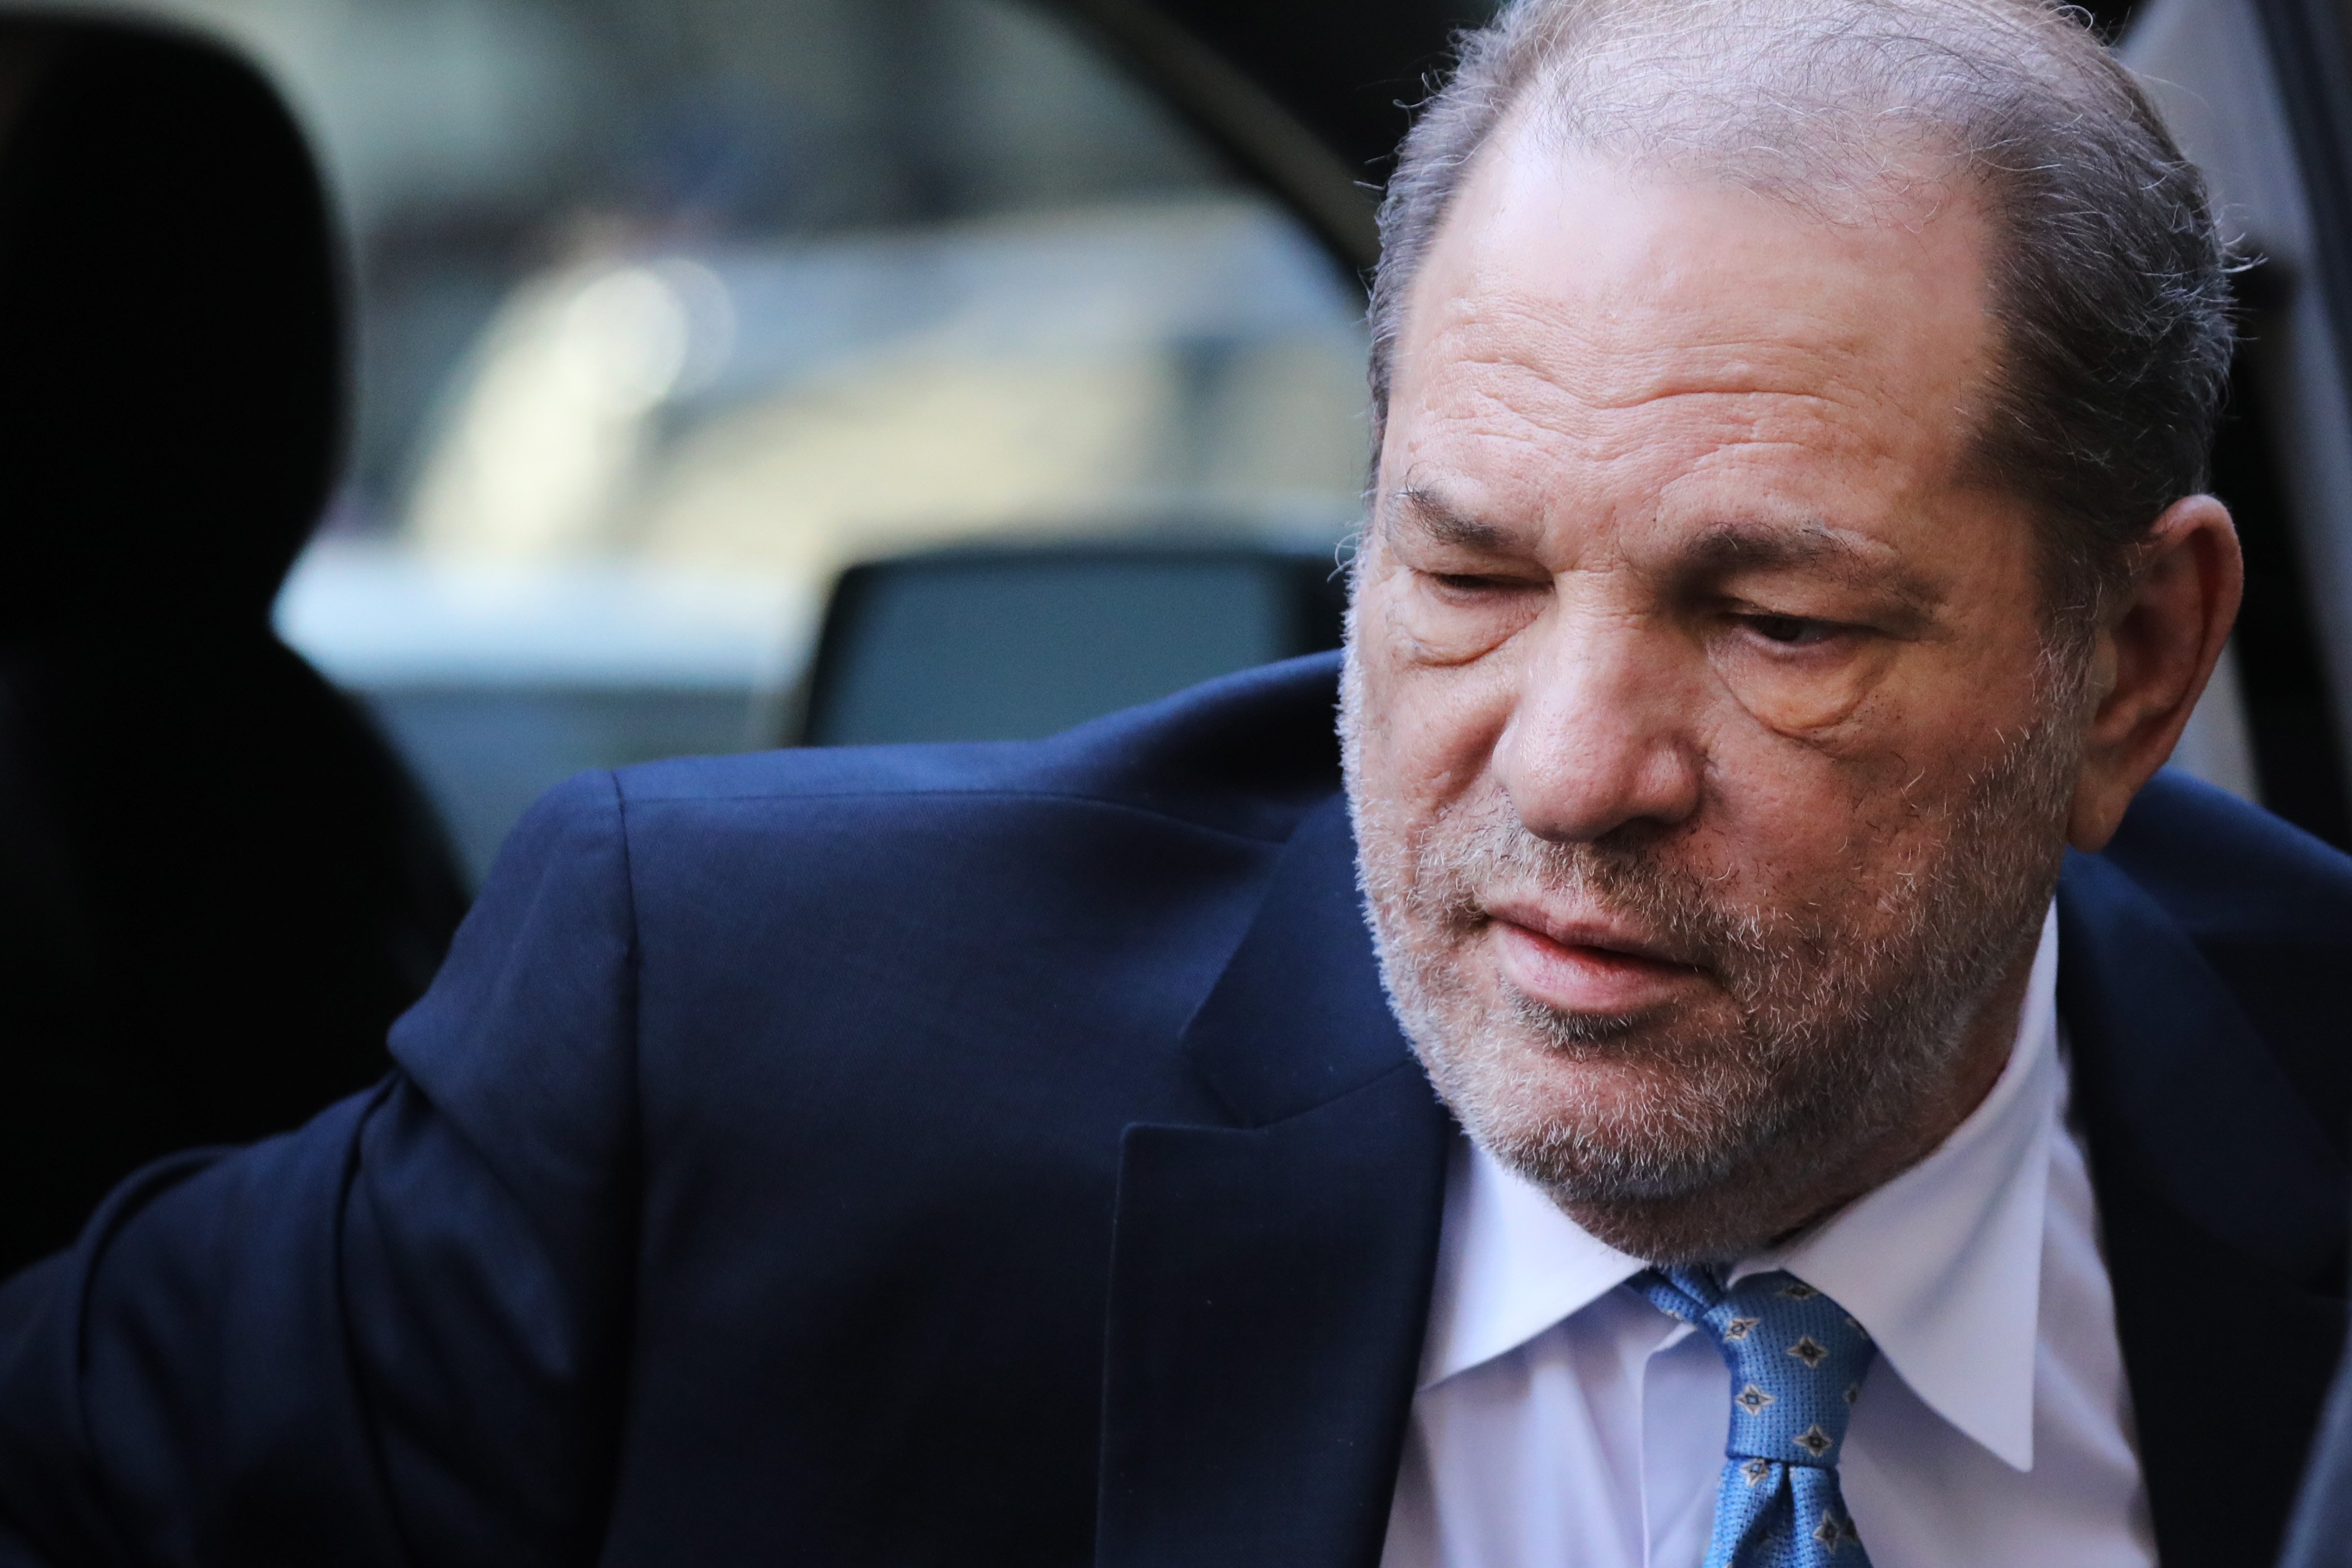 NEW YORK, NEW YORK - FEBRUARY 24: Harvey Weinstein enters a Manhattan court house as a jury continues with deliberations in his trial on February 24, 2020 in New York City. On Friday the judg